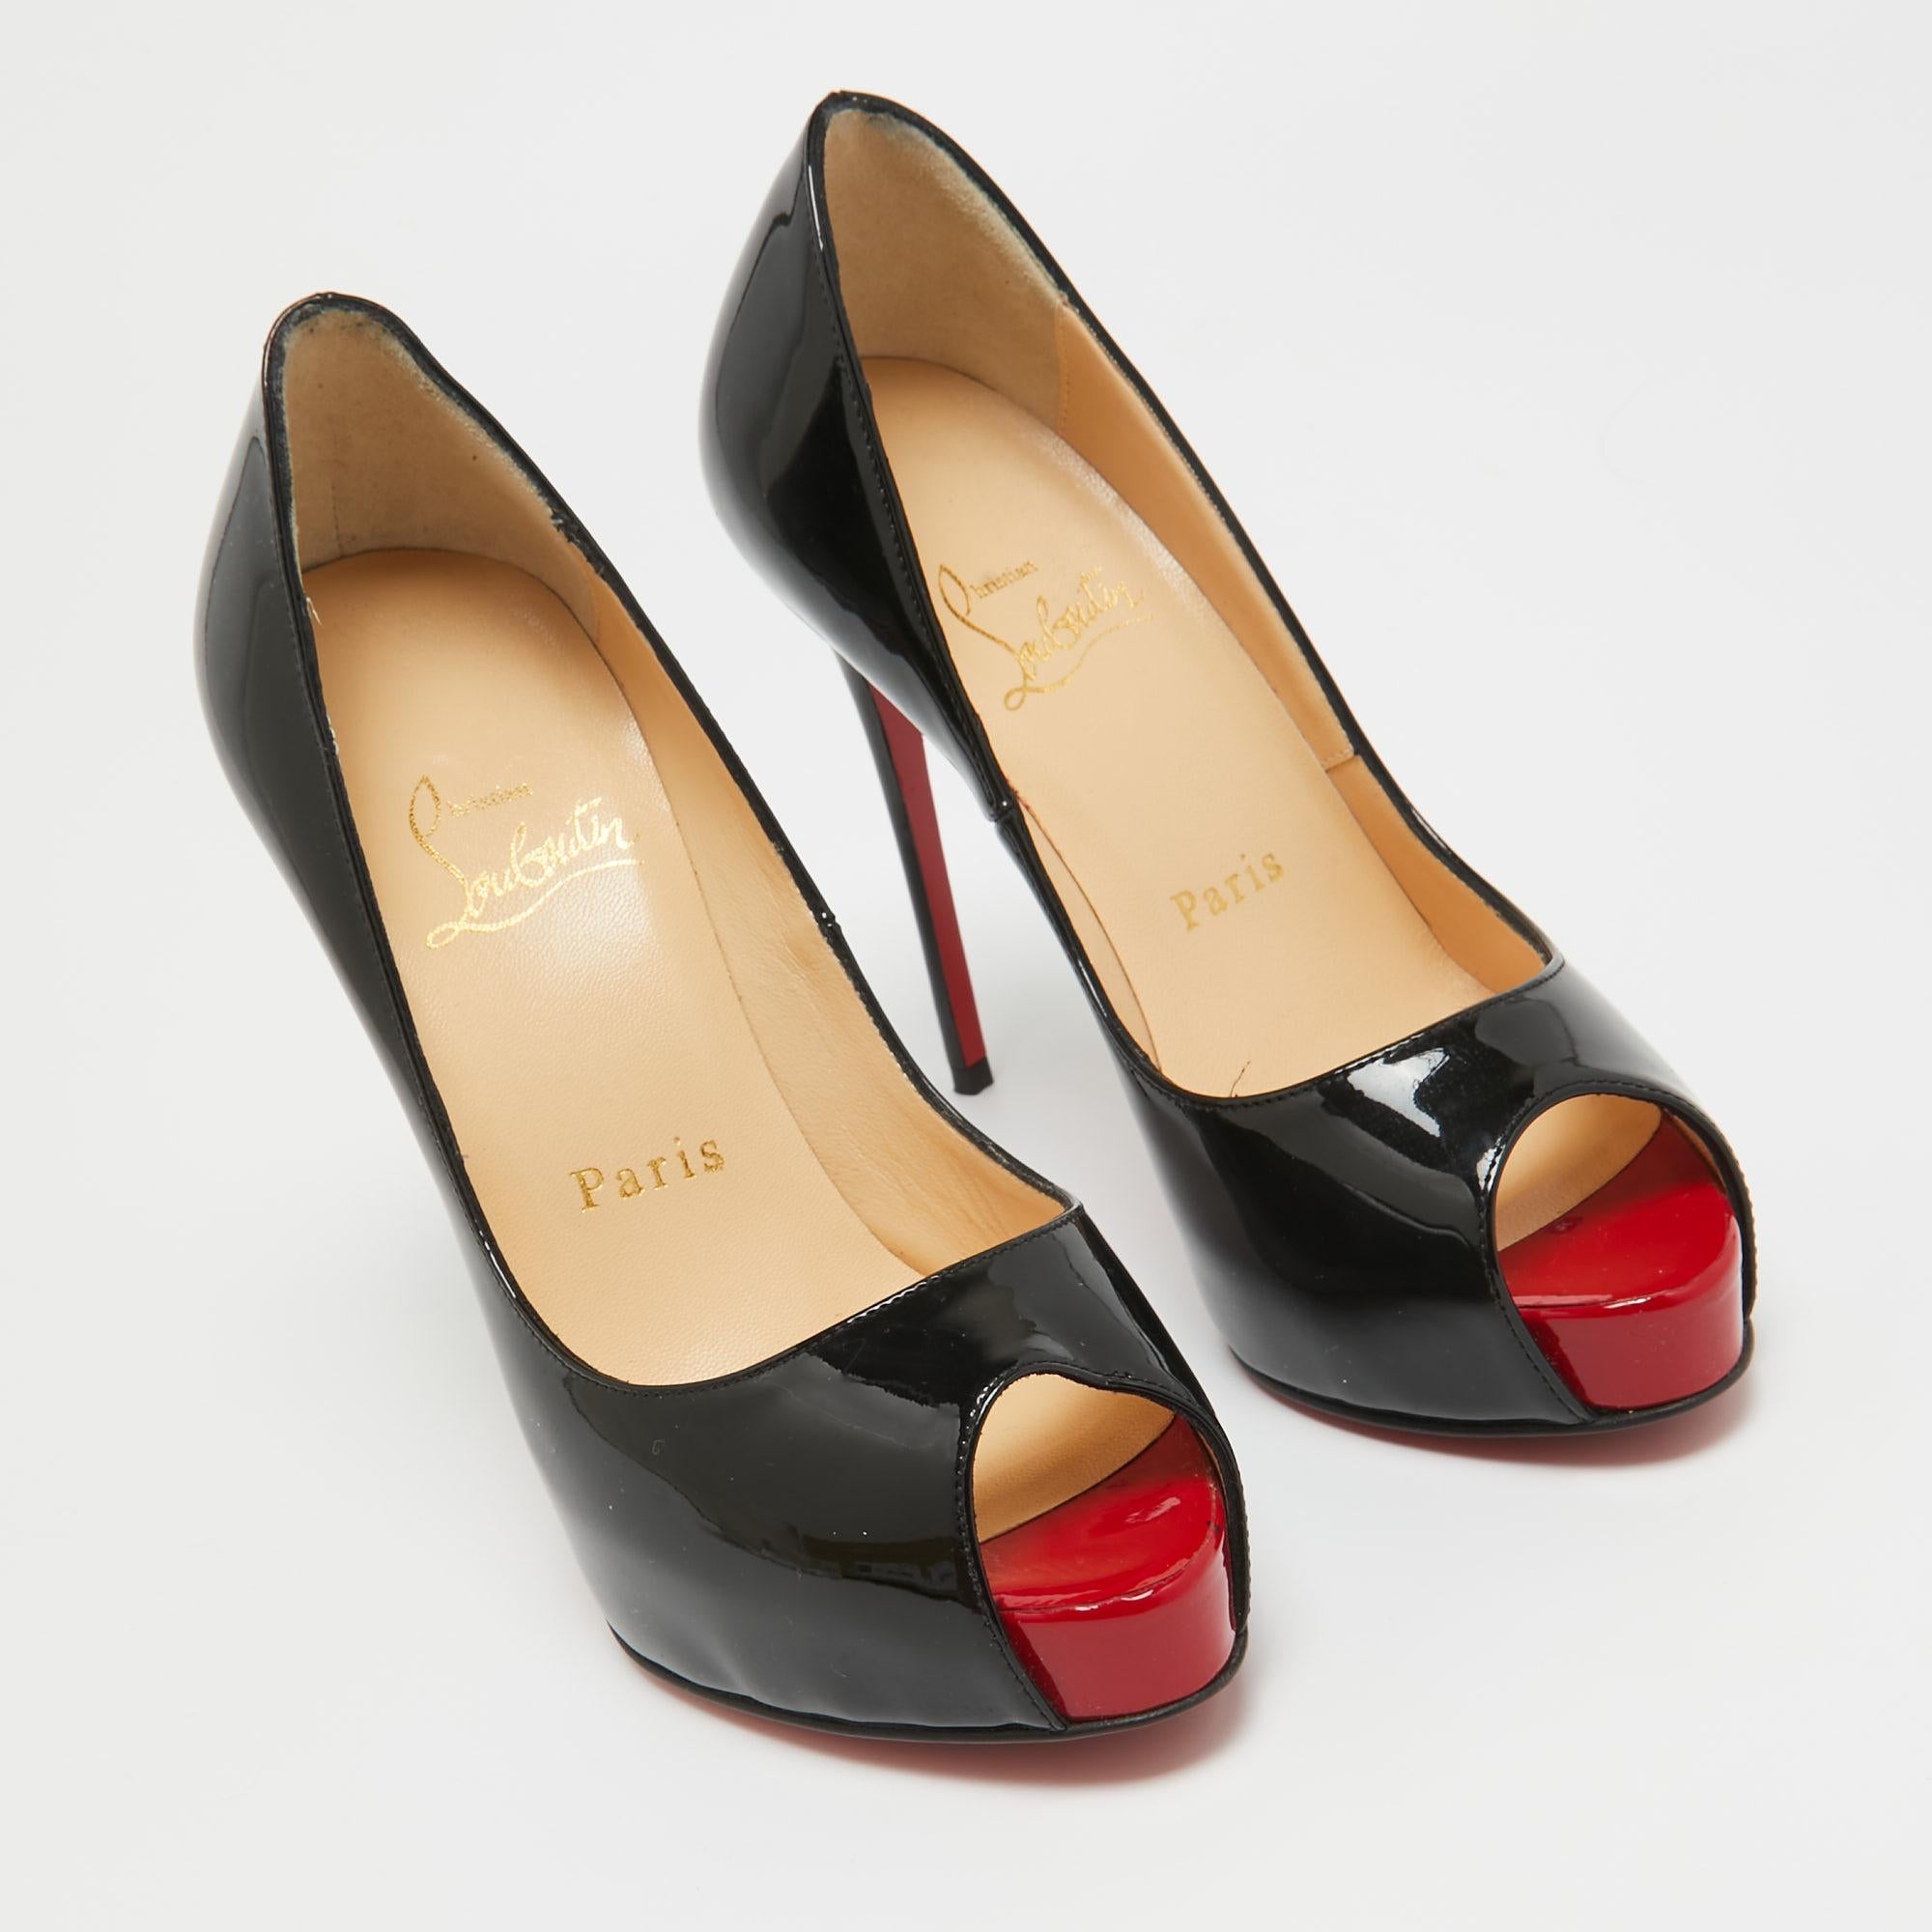 Christian Louboutin Black Patent Leather Very Prive Pumps Size 34 5